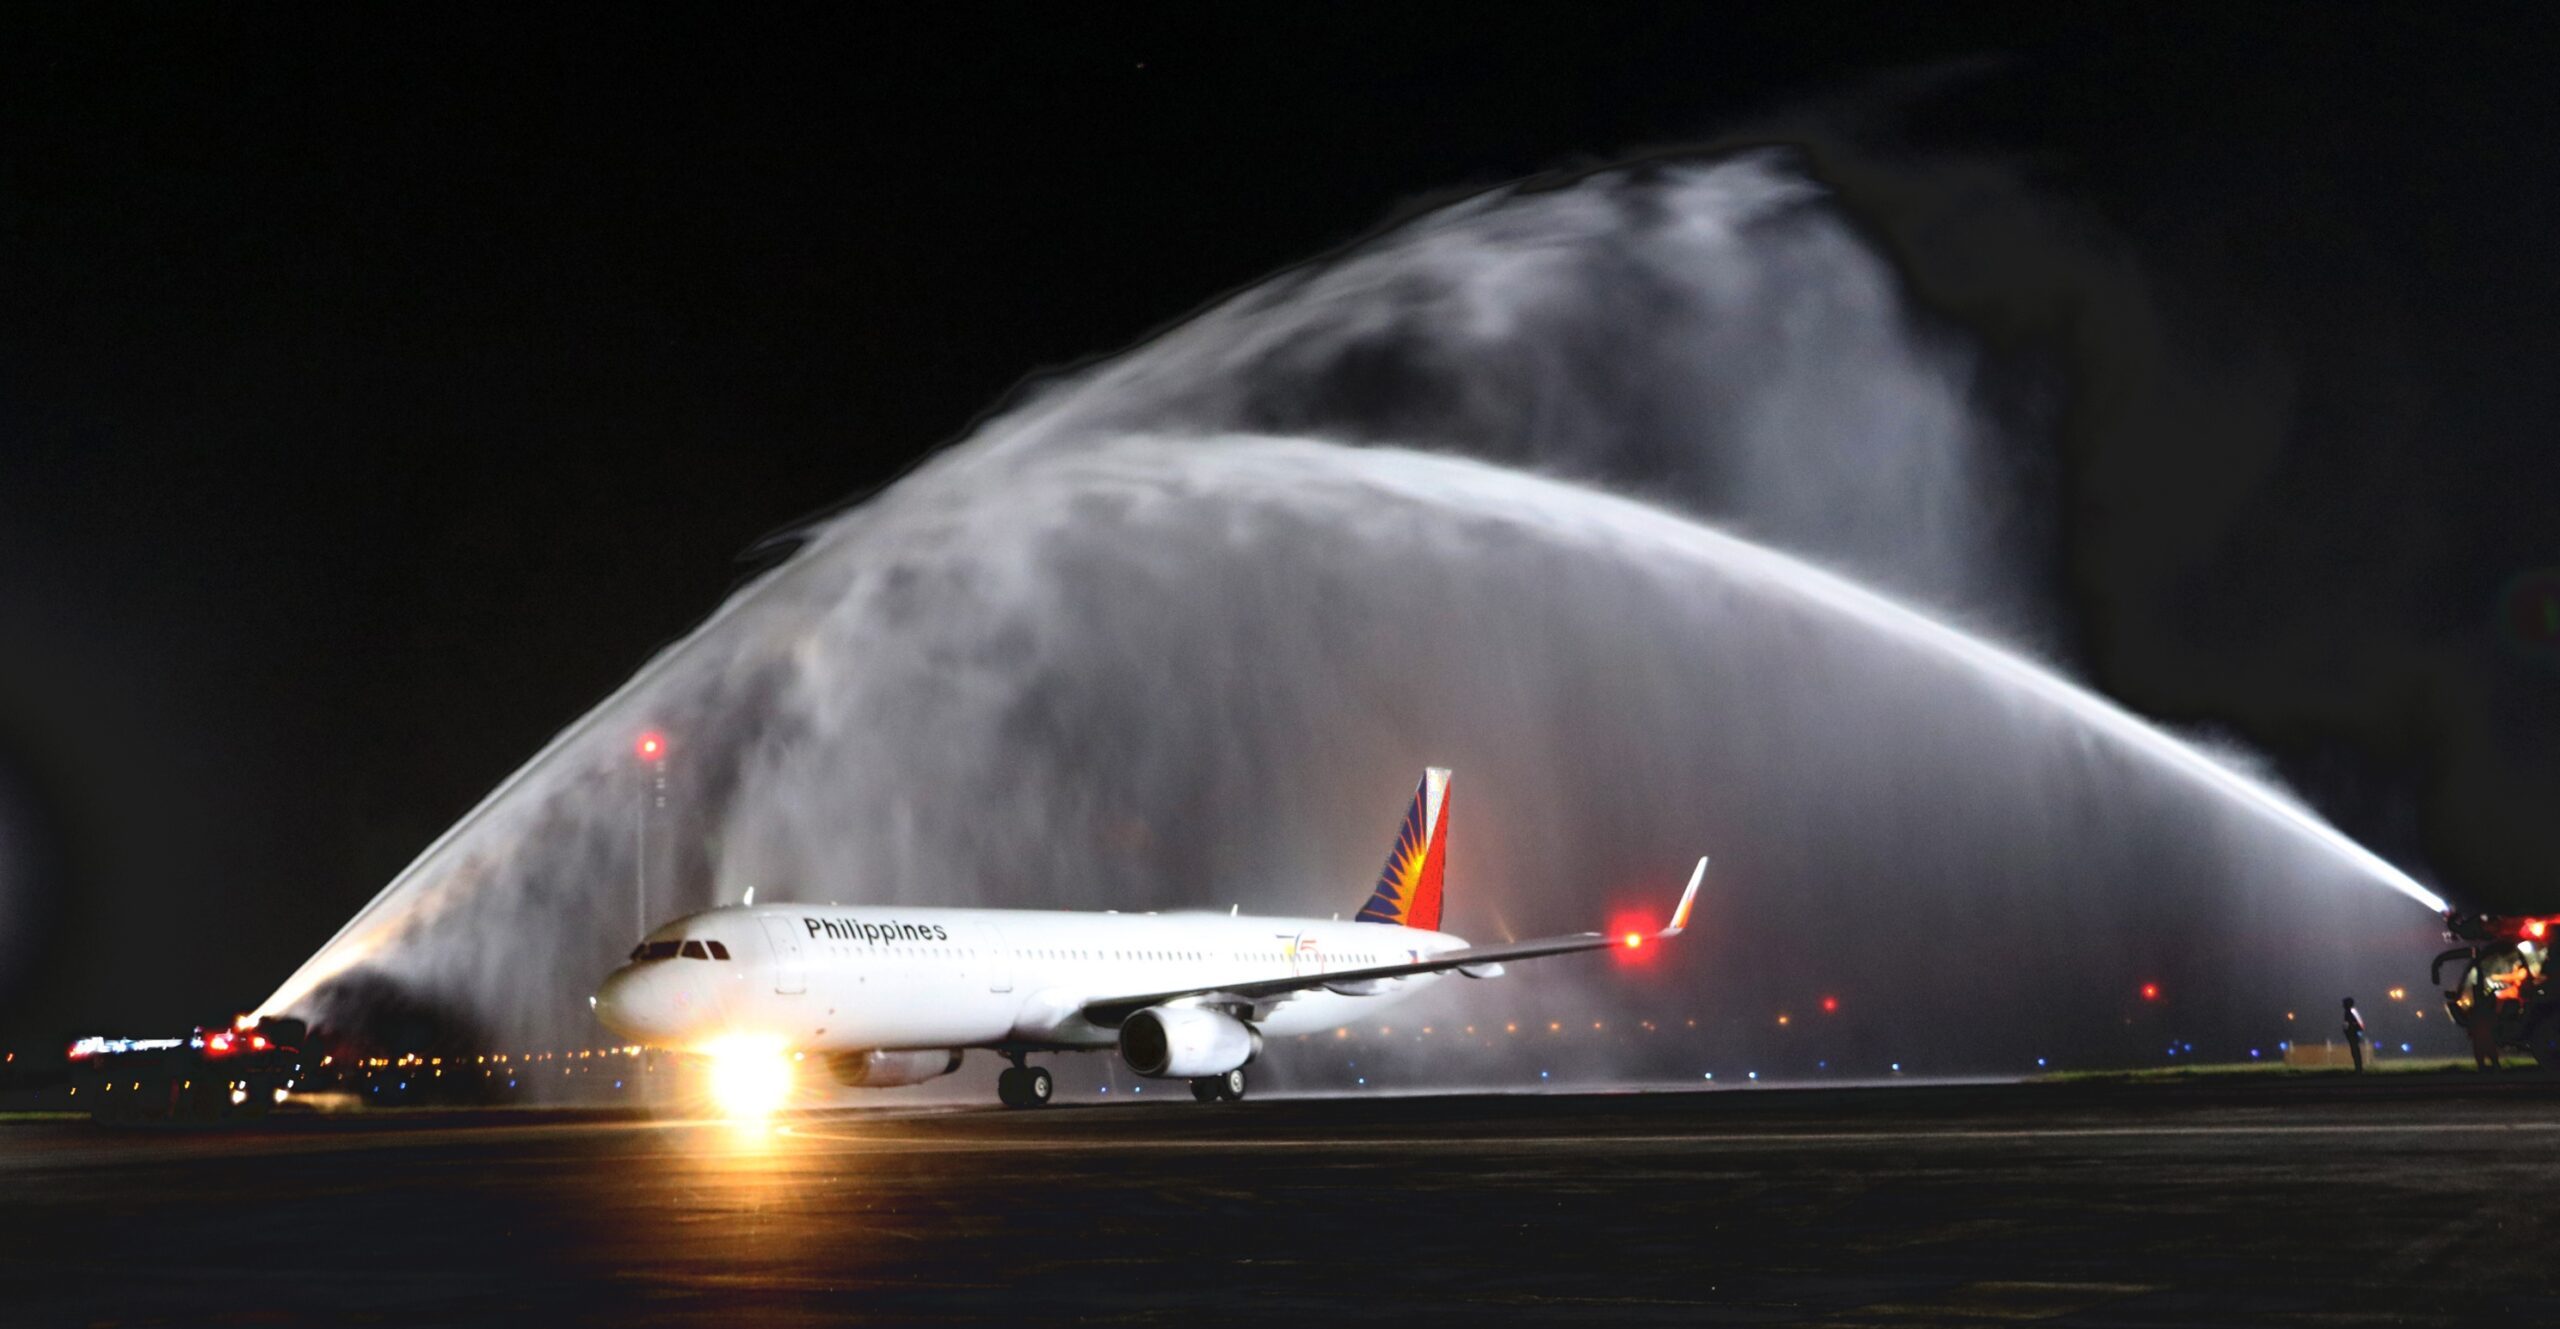 PAL hopeful to become 4-star airline this 2018